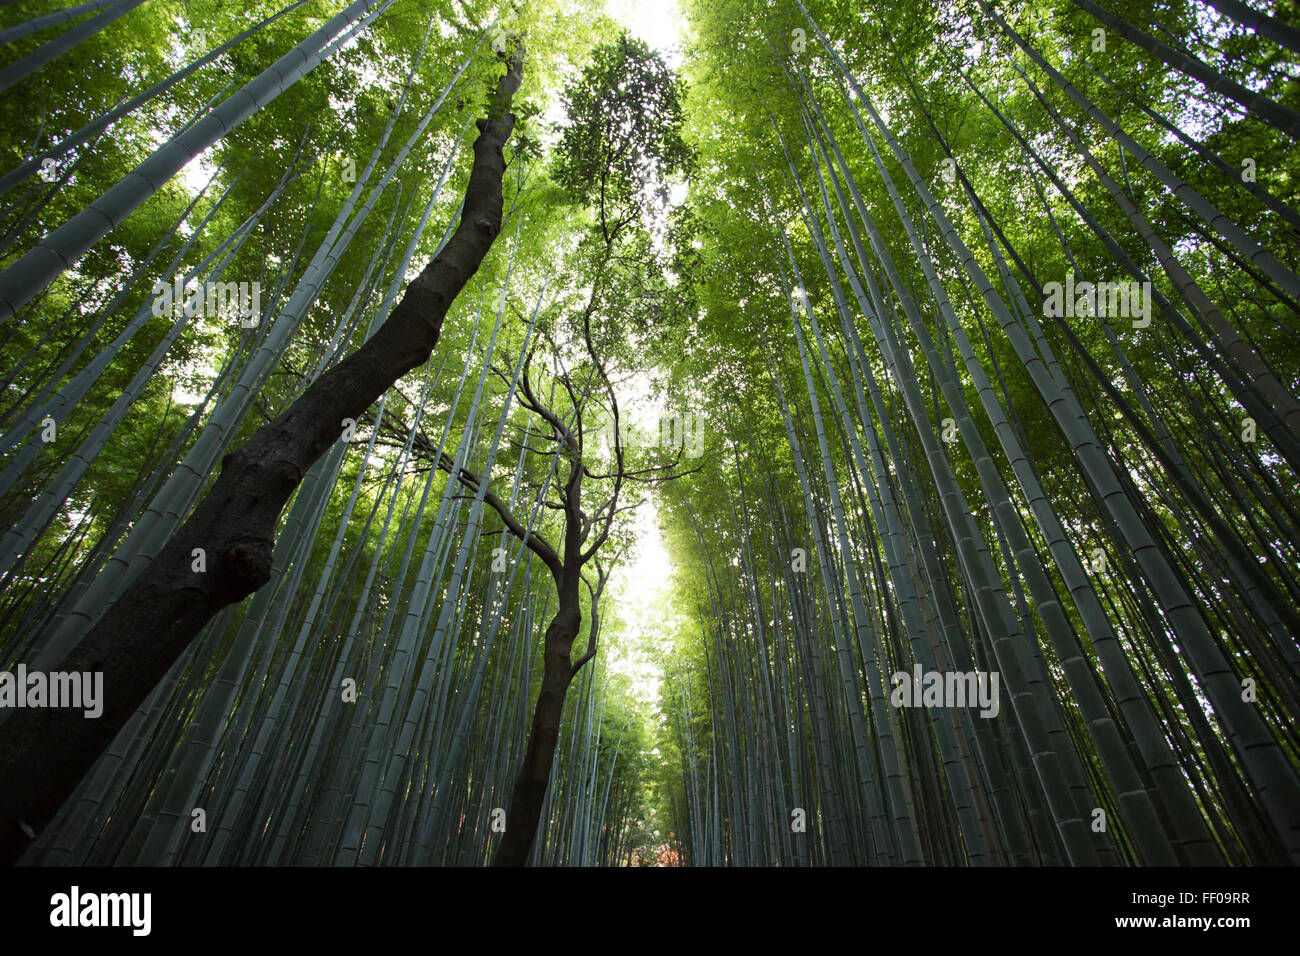 Bamboo Forest Bamboo Forest Stock Photo